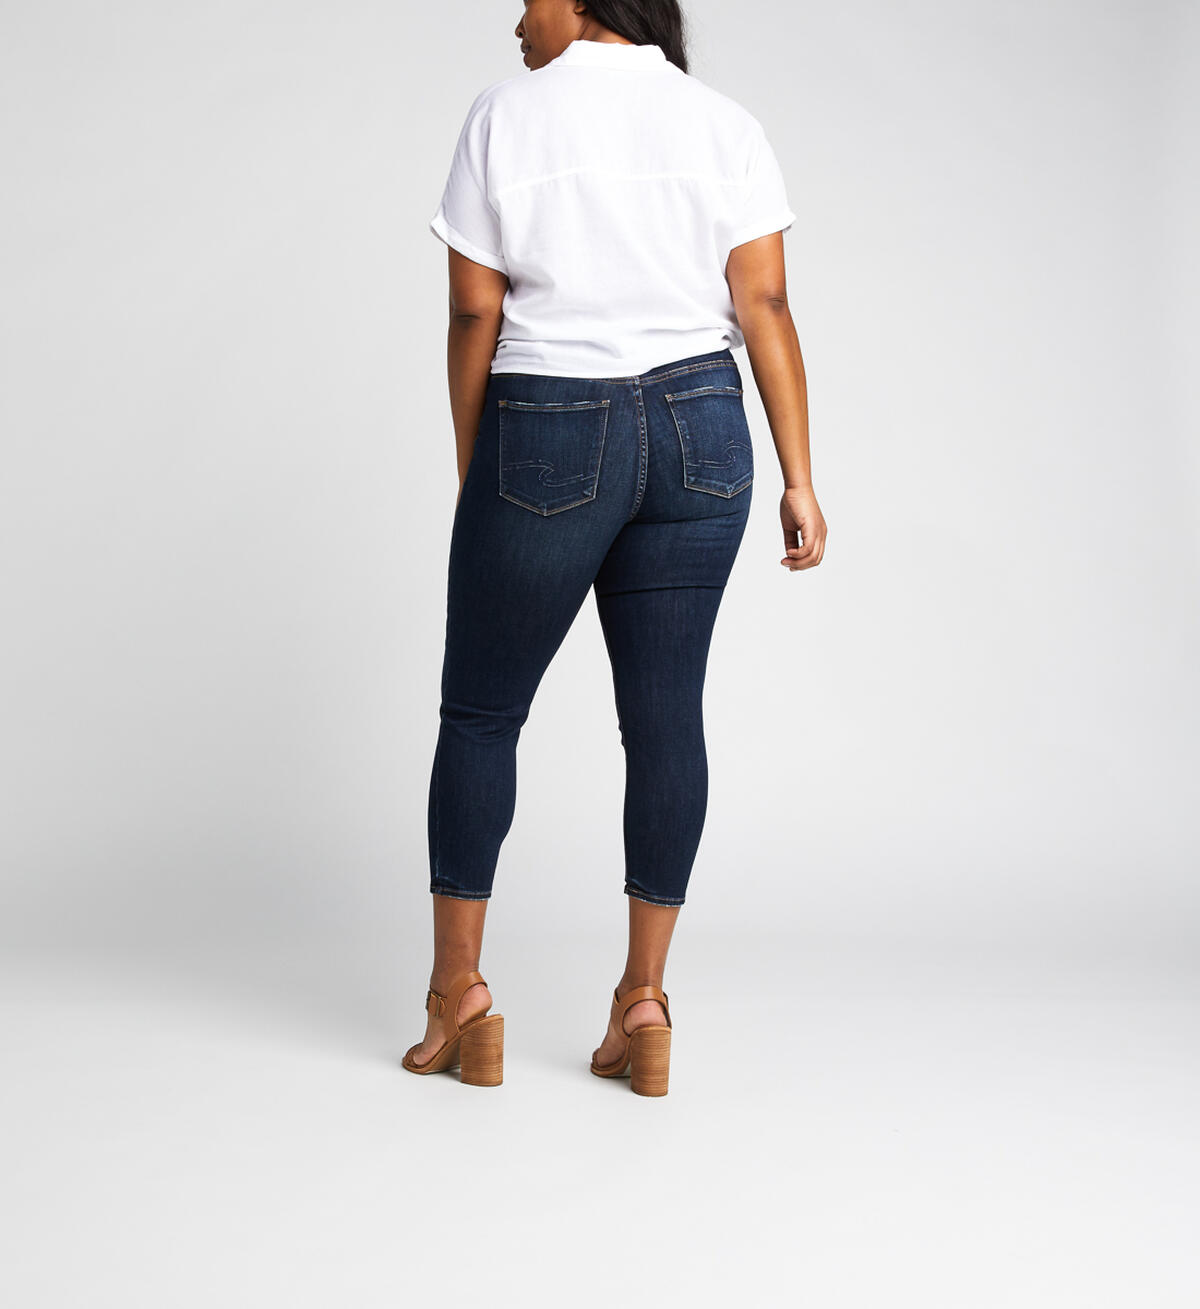 Avery High-Rise Curvy Skinny Crop Jeans, , hi-res image number 1